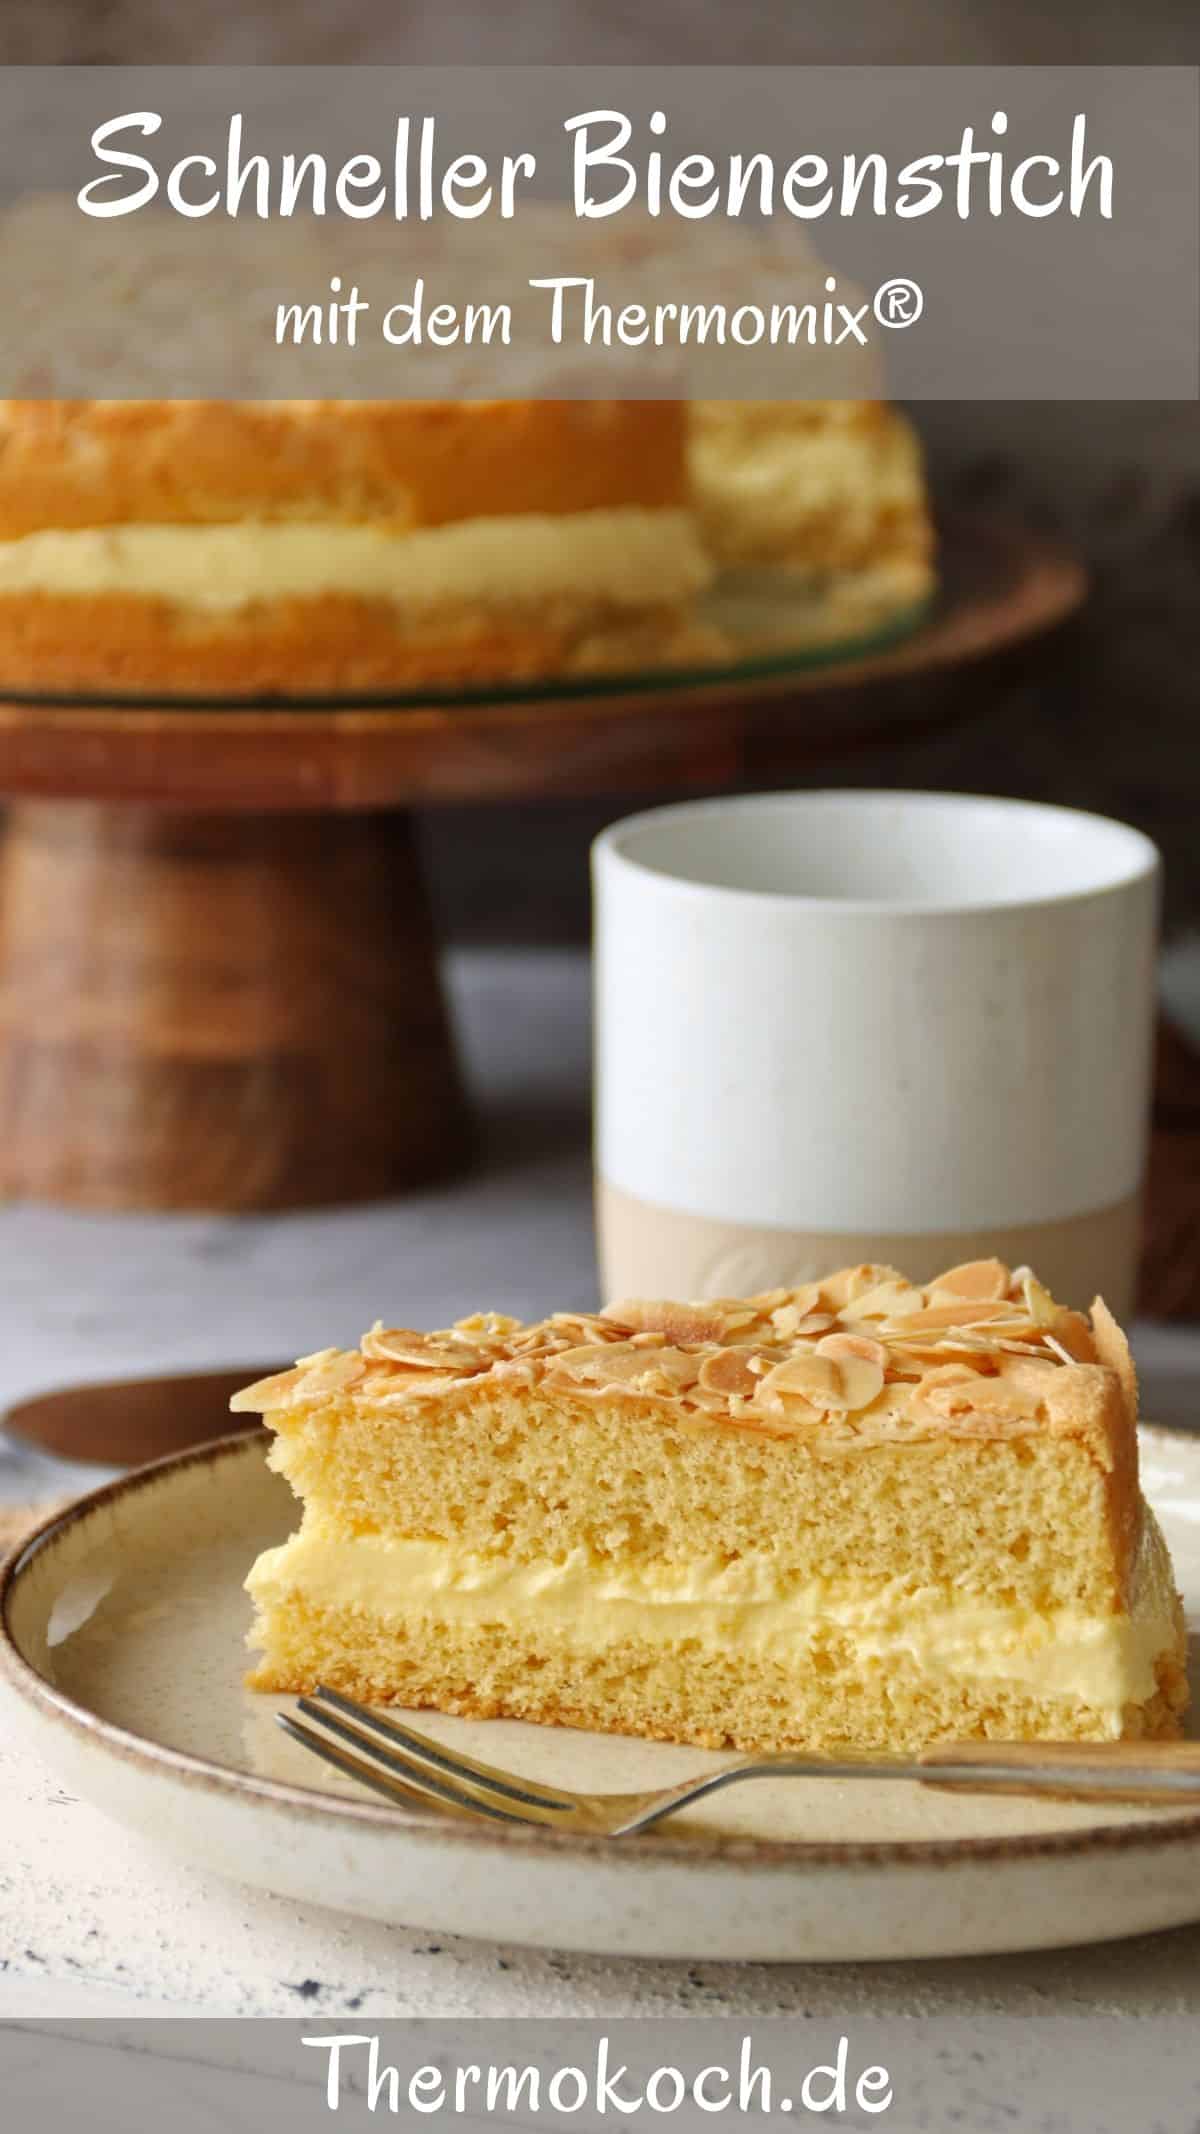 A piece of bee sting cake on a plate. In the background, the rest of the cake on a cake stand.